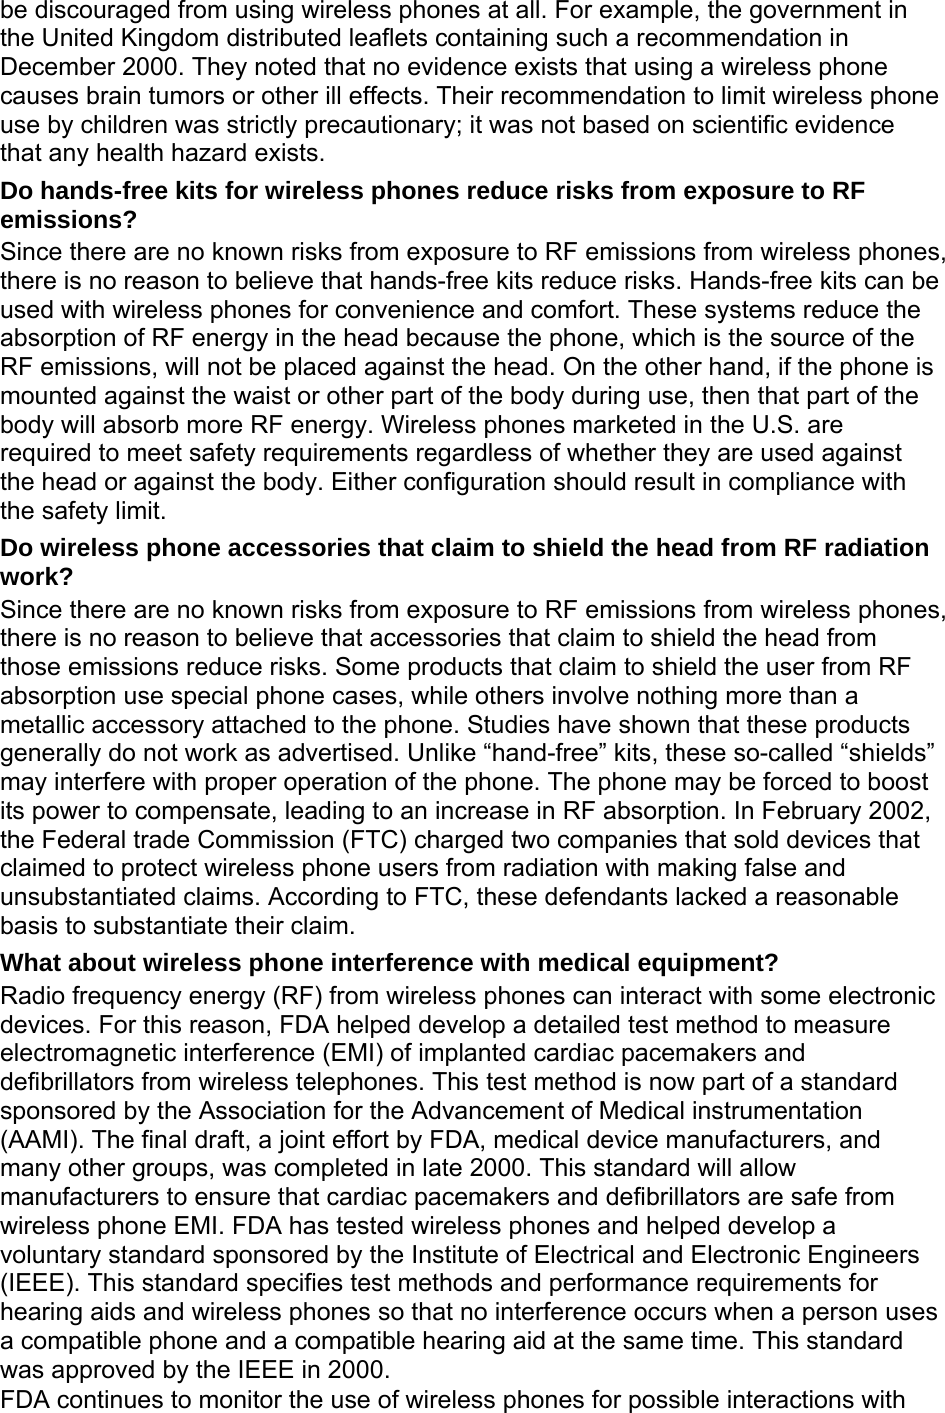 be discouraged from using wireless phones at all. For example, the government in the United Kingdom distributed leaflets containing such a recommendation in December 2000. They noted that no evidence exists that using a wireless phone causes brain tumors or other ill effects. Their recommendation to limit wireless phone use by children was strictly precautionary; it was not based on scientific evidence that any health hazard exists.   Do hands-free kits for wireless phones reduce risks from exposure to RF emissions? Since there are no known risks from exposure to RF emissions from wireless phones, there is no reason to believe that hands-free kits reduce risks. Hands-free kits can be used with wireless phones for convenience and comfort. These systems reduce the absorption of RF energy in the head because the phone, which is the source of the RF emissions, will not be placed against the head. On the other hand, if the phone is mounted against the waist or other part of the body during use, then that part of the body will absorb more RF energy. Wireless phones marketed in the U.S. are required to meet safety requirements regardless of whether they are used against the head or against the body. Either configuration should result in compliance with the safety limit. Do wireless phone accessories that claim to shield the head from RF radiation work? Since there are no known risks from exposure to RF emissions from wireless phones, there is no reason to believe that accessories that claim to shield the head from those emissions reduce risks. Some products that claim to shield the user from RF absorption use special phone cases, while others involve nothing more than a metallic accessory attached to the phone. Studies have shown that these products generally do not work as advertised. Unlike “hand-free” kits, these so-called “shields” may interfere with proper operation of the phone. The phone may be forced to boost its power to compensate, leading to an increase in RF absorption. In February 2002, the Federal trade Commission (FTC) charged two companies that sold devices that claimed to protect wireless phone users from radiation with making false and unsubstantiated claims. According to FTC, these defendants lacked a reasonable basis to substantiate their claim. What about wireless phone interference with medical equipment? Radio frequency energy (RF) from wireless phones can interact with some electronic devices. For this reason, FDA helped develop a detailed test method to measure electromagnetic interference (EMI) of implanted cardiac pacemakers and defibrillators from wireless telephones. This test method is now part of a standard sponsored by the Association for the Advancement of Medical instrumentation (AAMI). The final draft, a joint effort by FDA, medical device manufacturers, and many other groups, was completed in late 2000. This standard will allow manufacturers to ensure that cardiac pacemakers and defibrillators are safe from wireless phone EMI. FDA has tested wireless phones and helped develop a voluntary standard sponsored by the Institute of Electrical and Electronic Engineers (IEEE). This standard specifies test methods and performance requirements for hearing aids and wireless phones so that no interference occurs when a person uses a compatible phone and a compatible hearing aid at the same time. This standard was approved by the IEEE in 2000. FDA continues to monitor the use of wireless phones for possible interactions with 